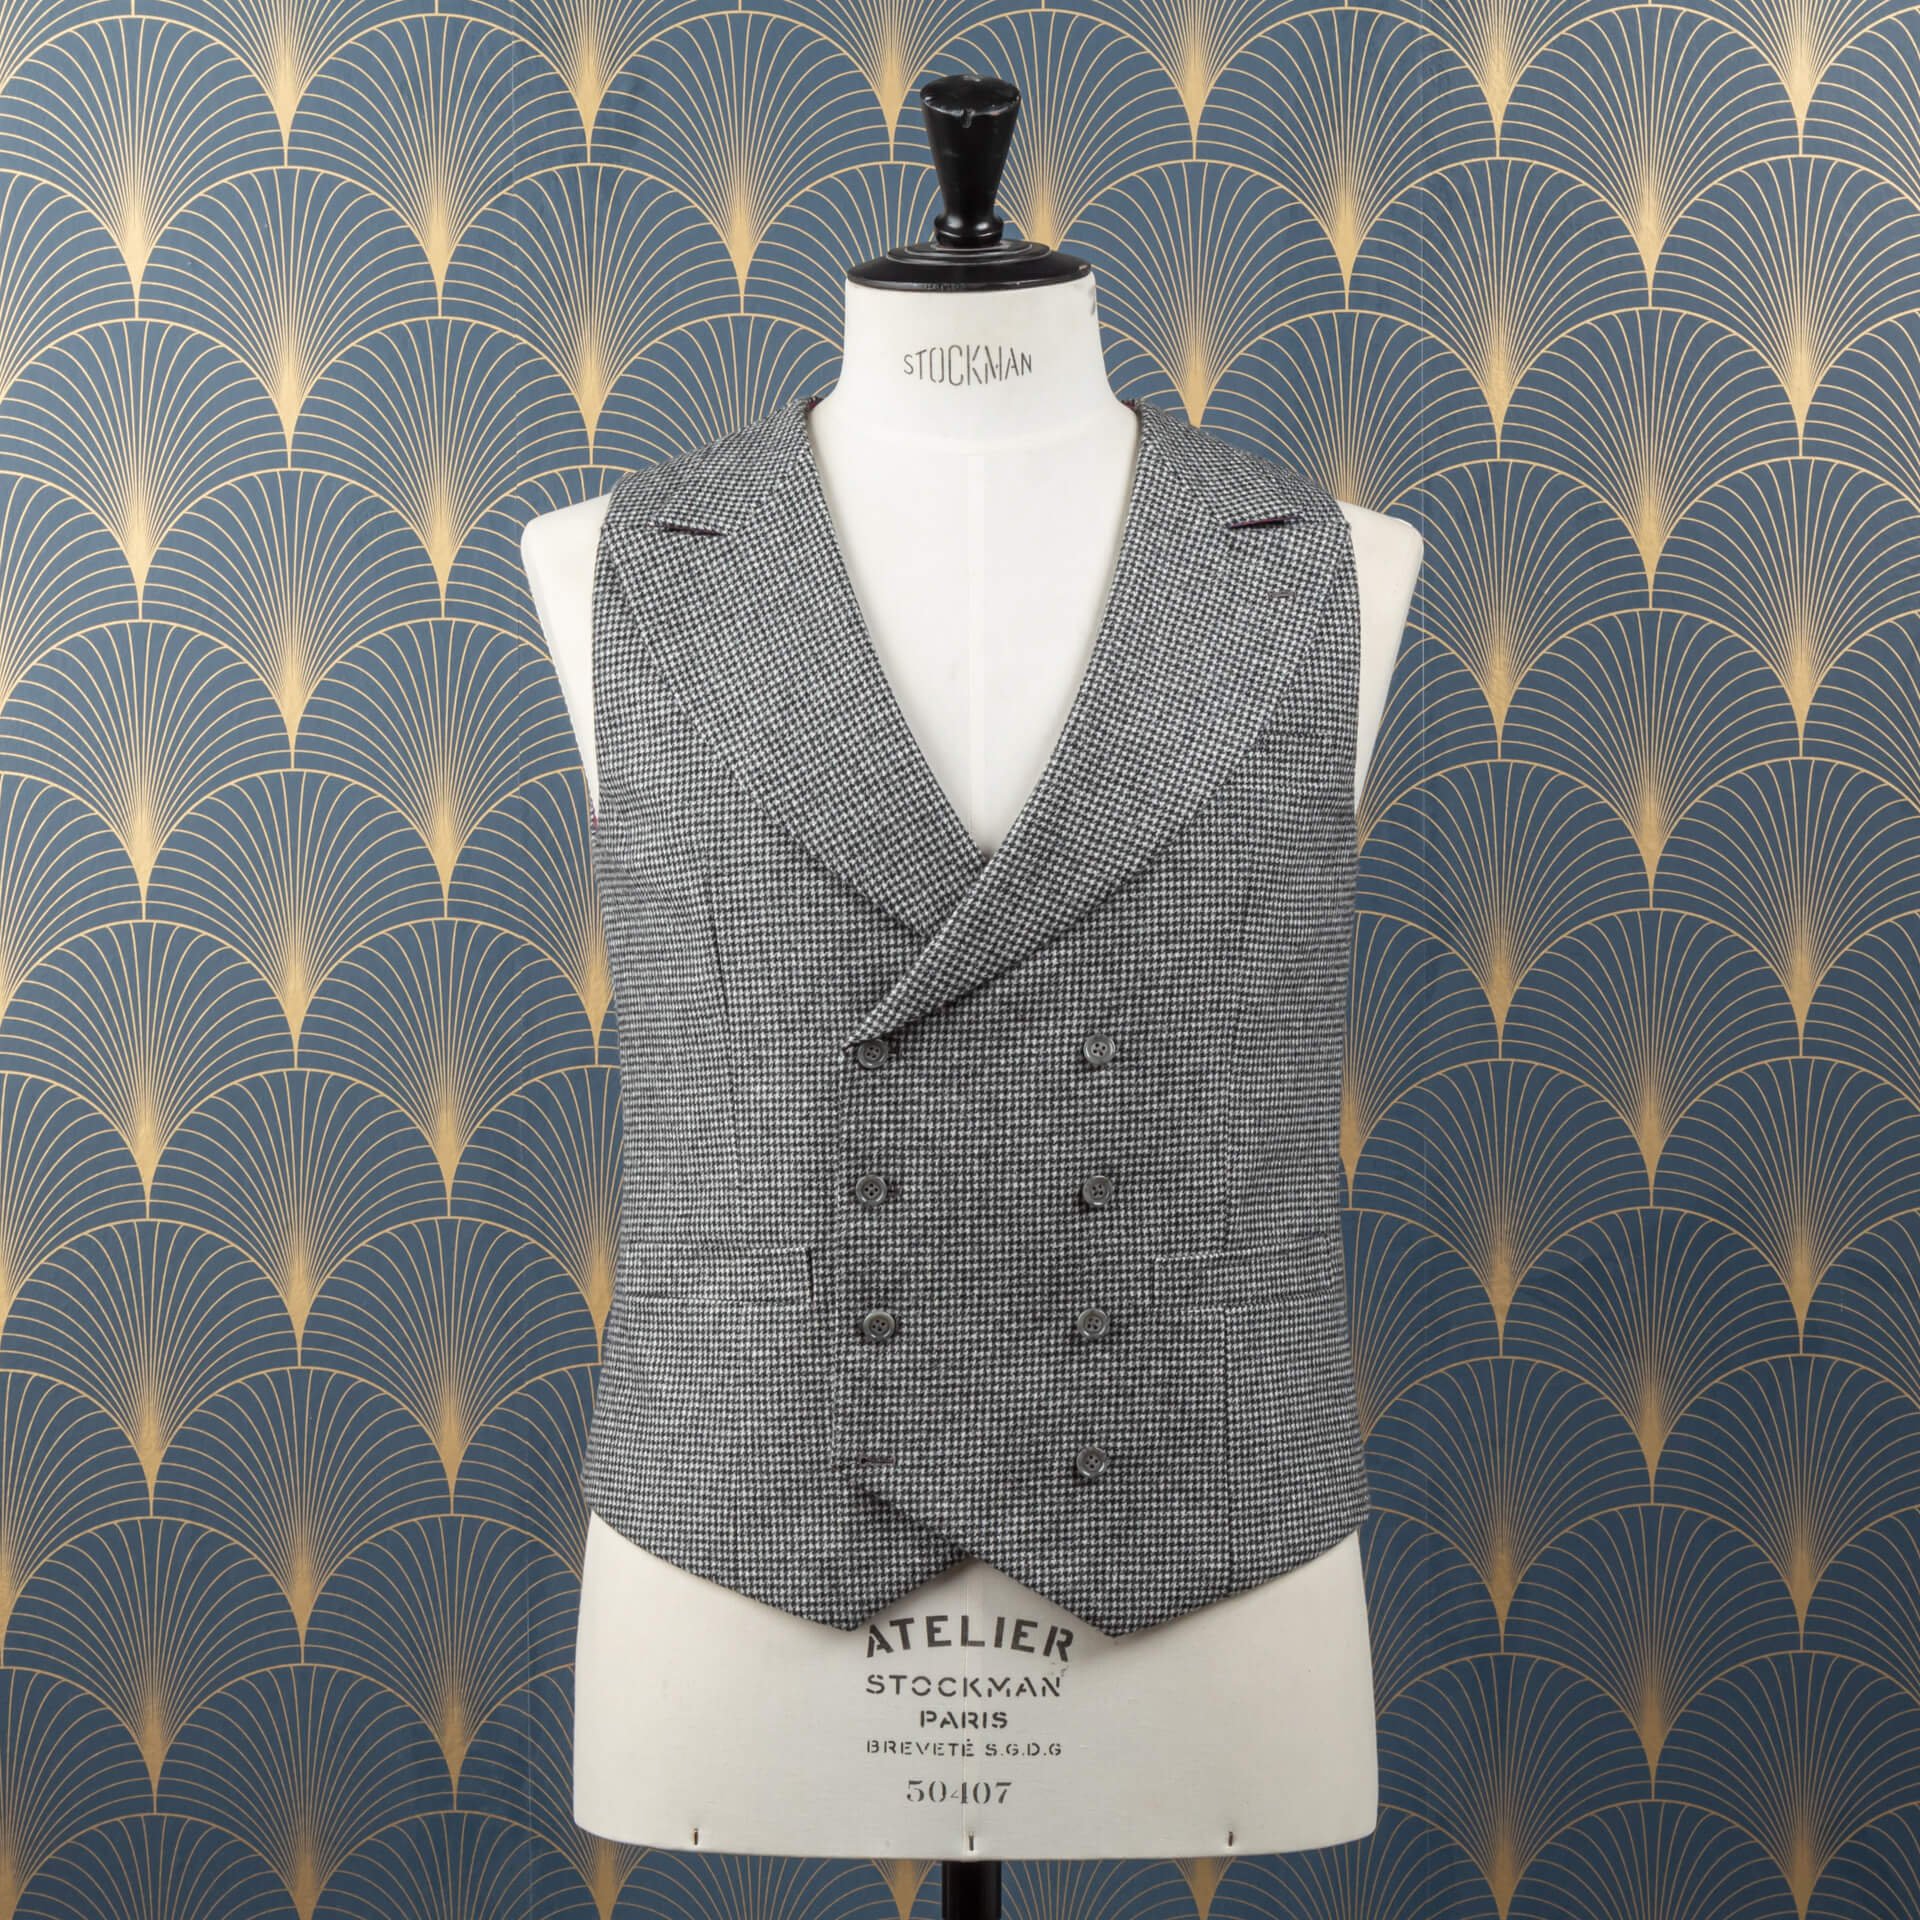 Three Roll Two Suit with Waistcoat